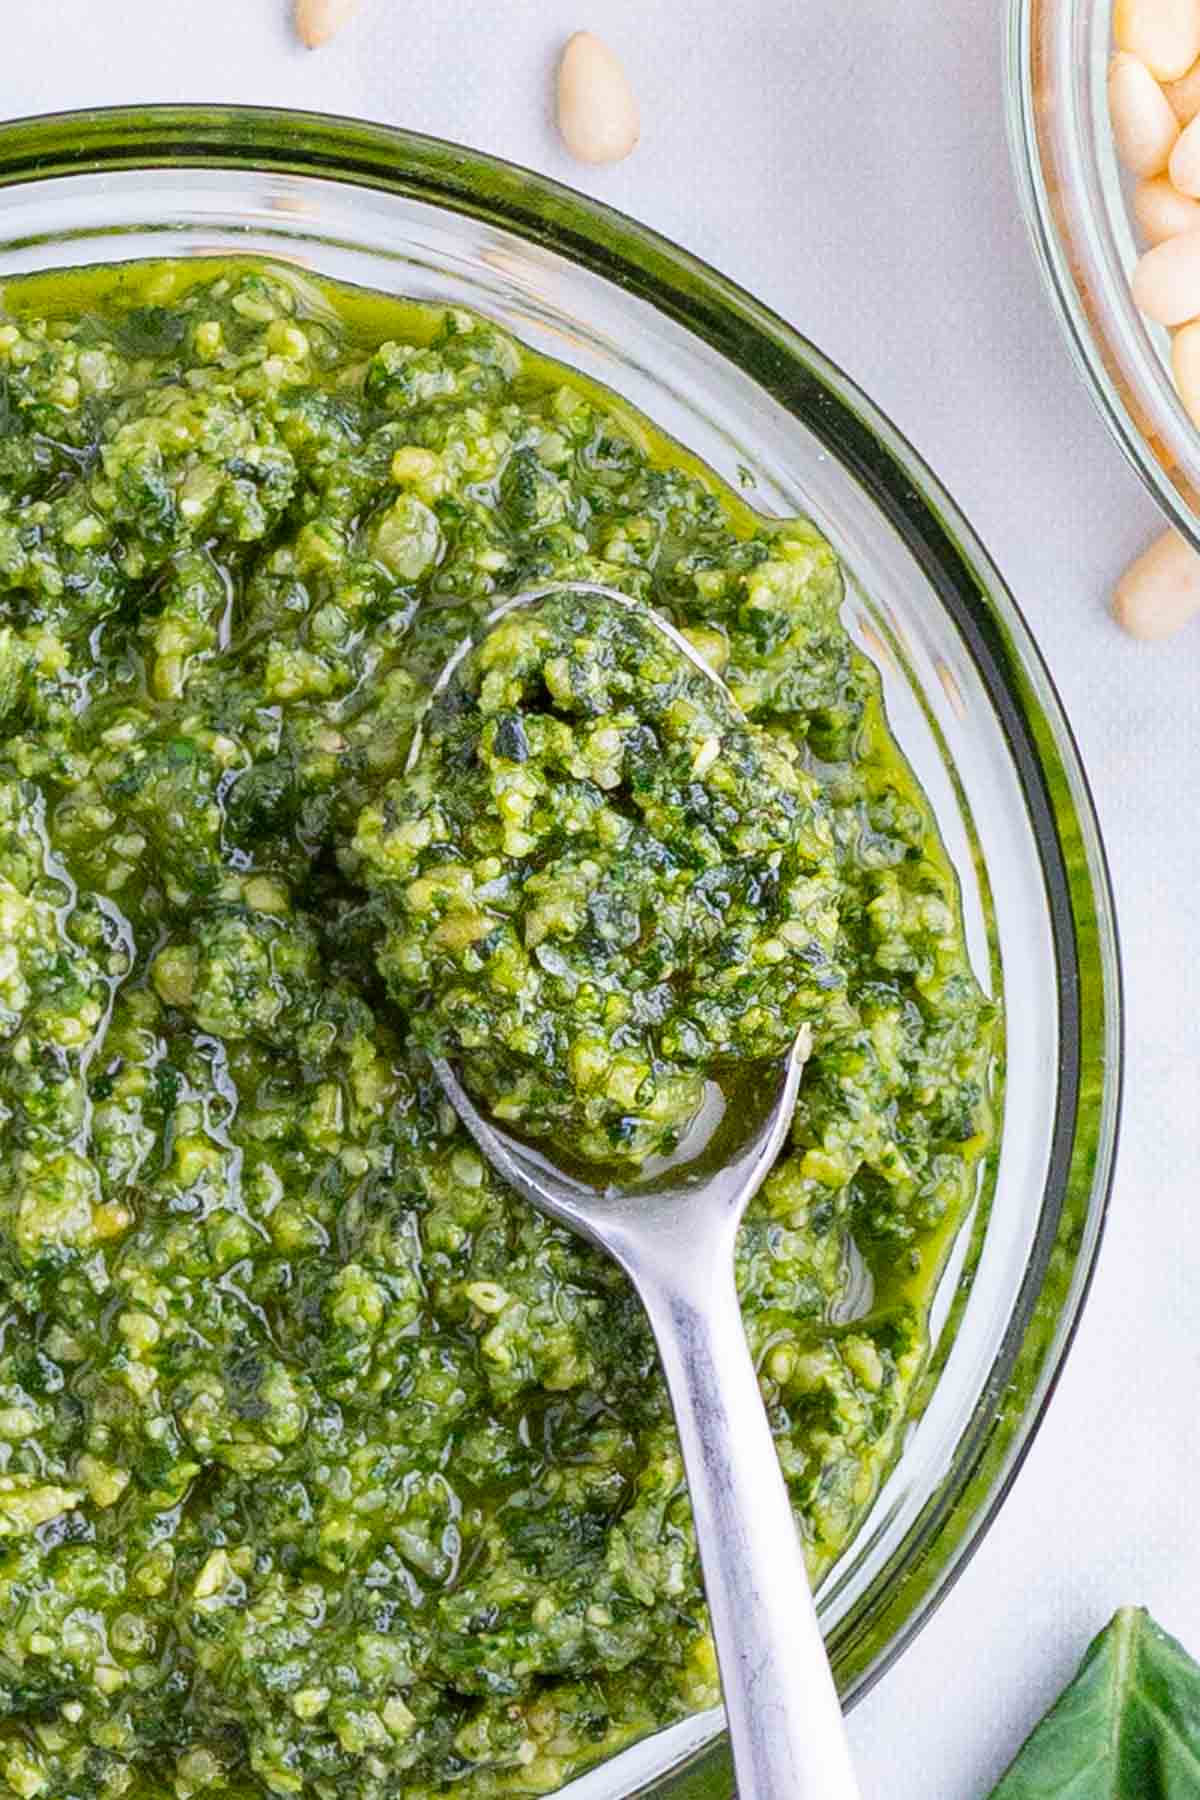 Homemade Basil Pesto Sauce RECIPE served in a clear, glass bowl and silver spoon.